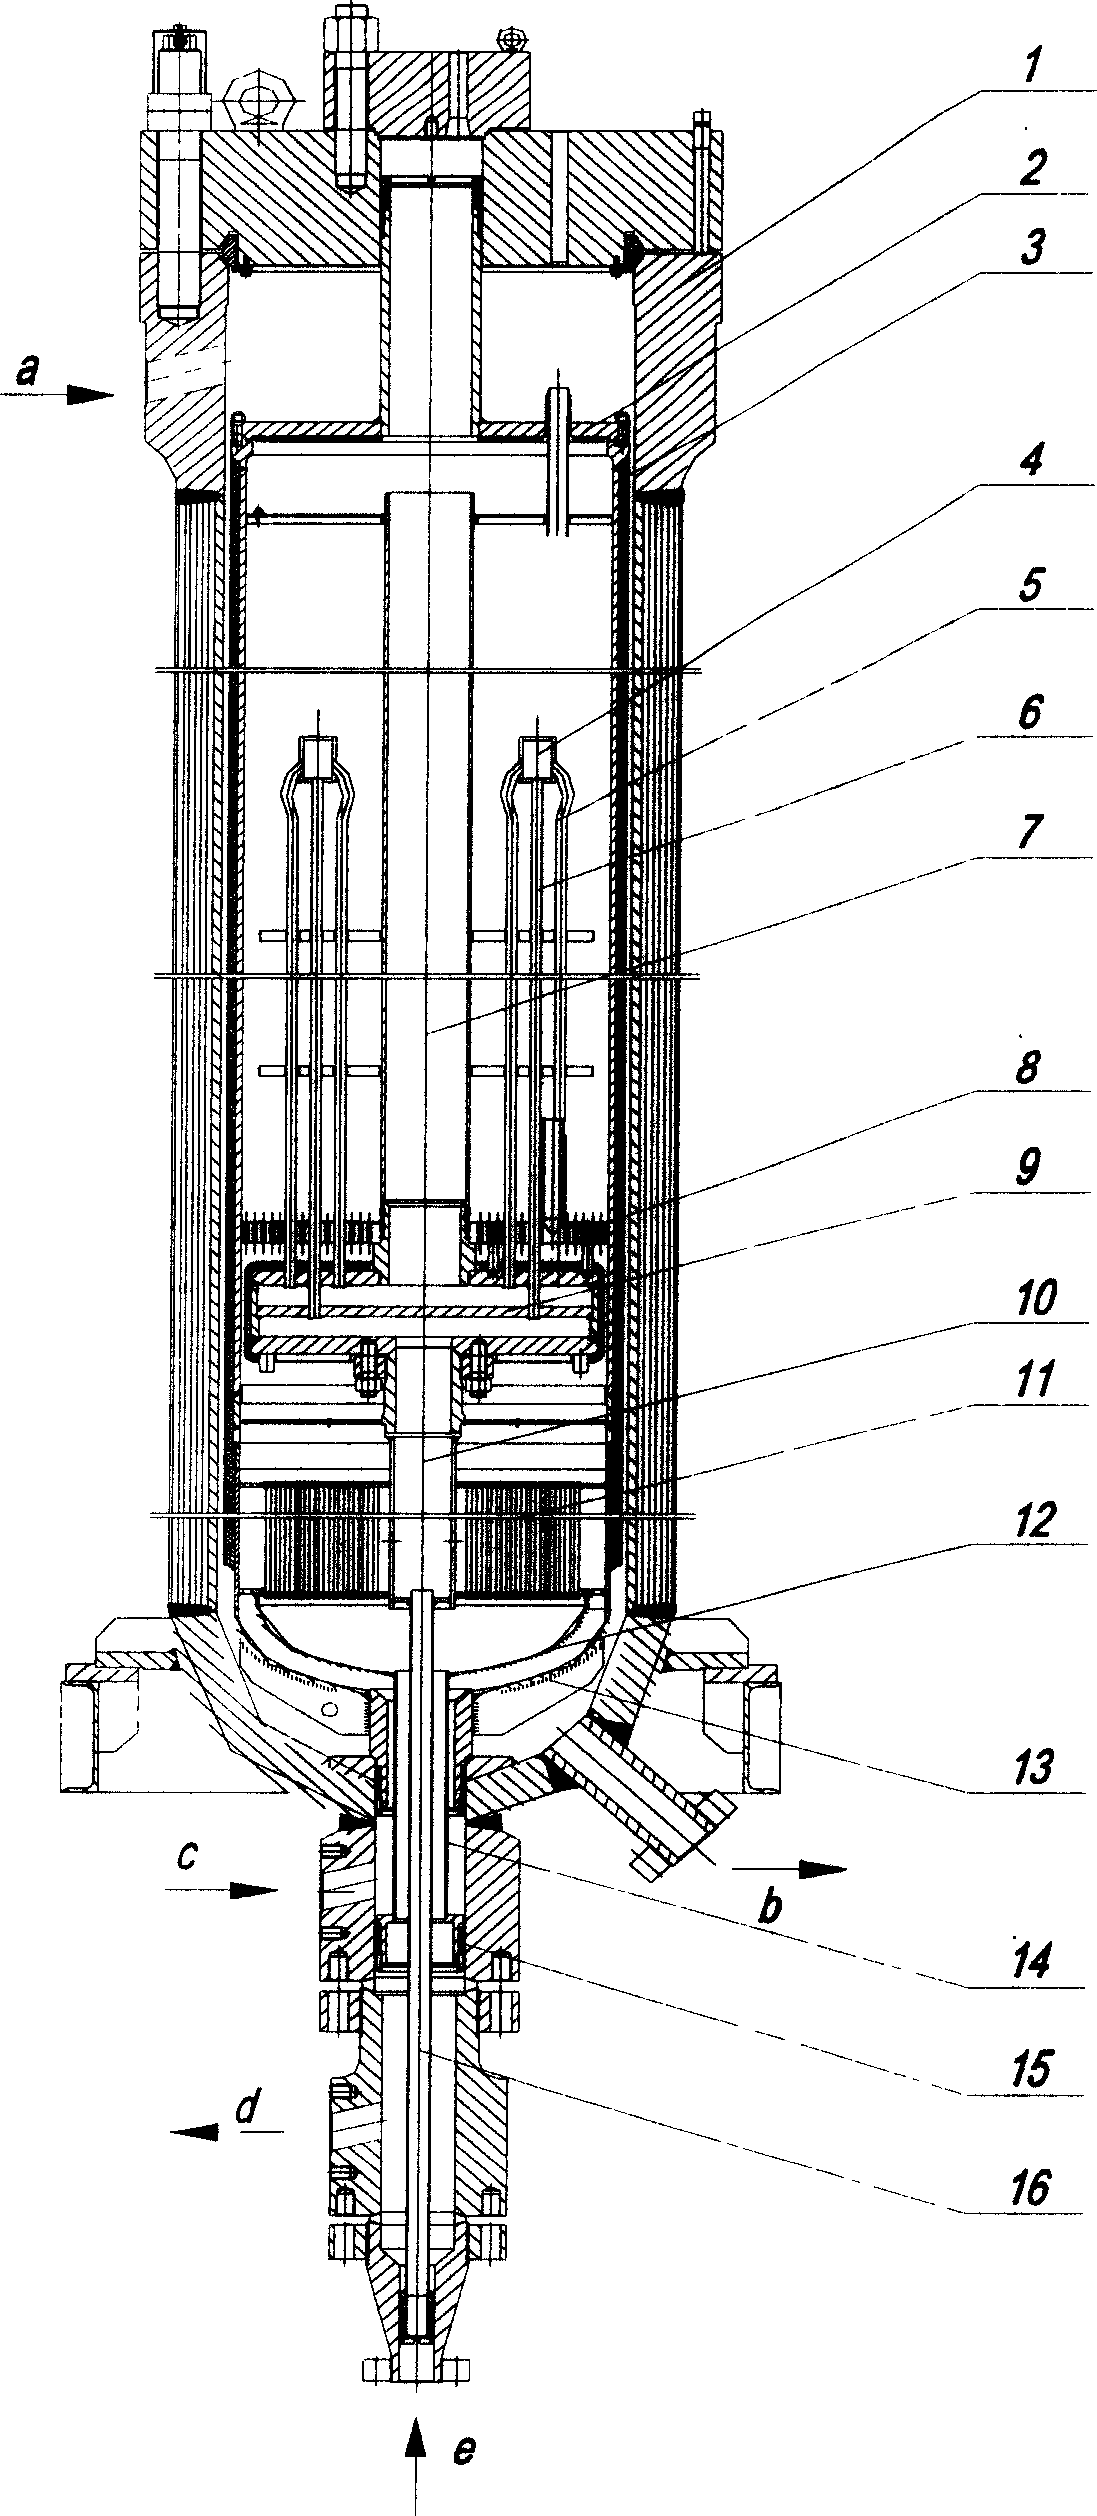 Externally heated medium and high pressure process and apparatus for synthesizing material ammonia with methanol and methane